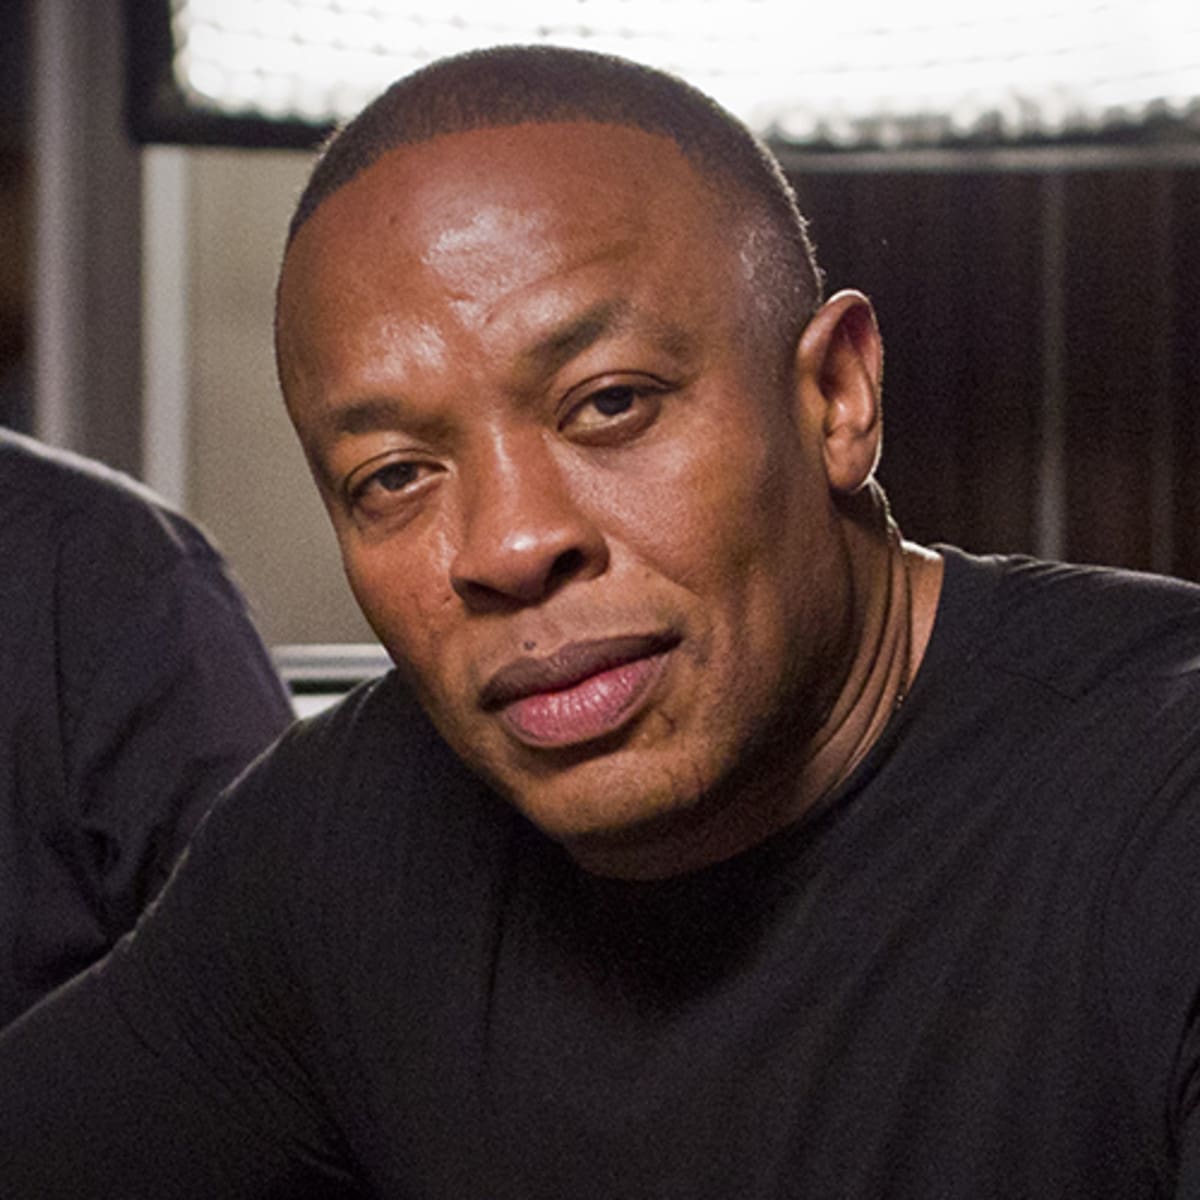 Nicole Young Files Restraining Order Against Dr. Dre